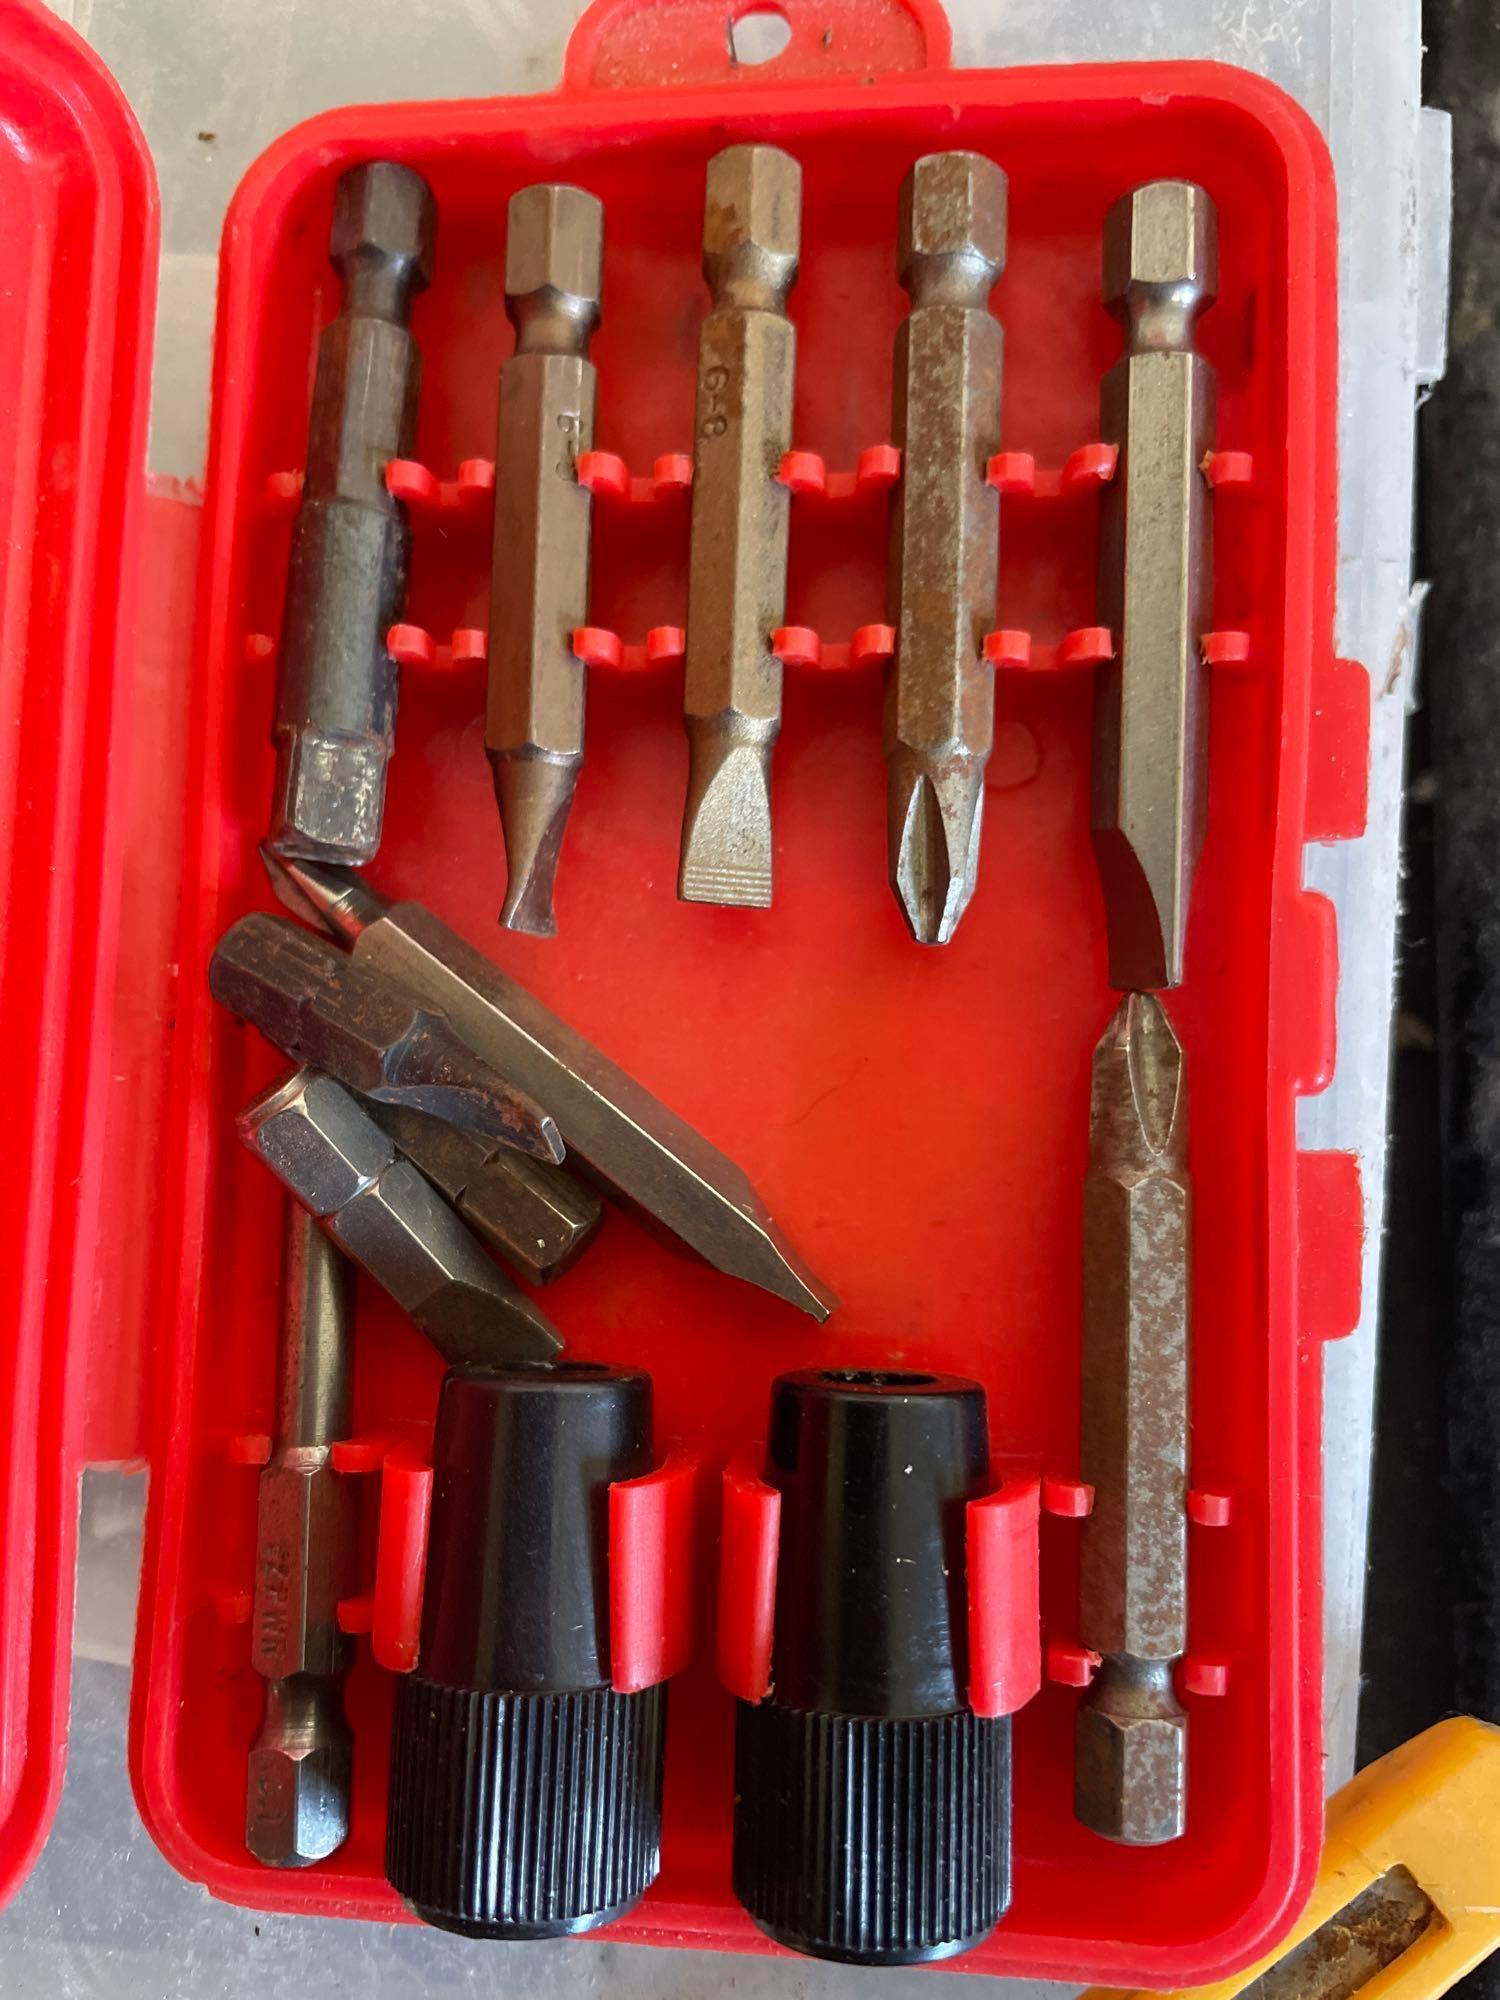 Gloves, Screw driver bit set and more